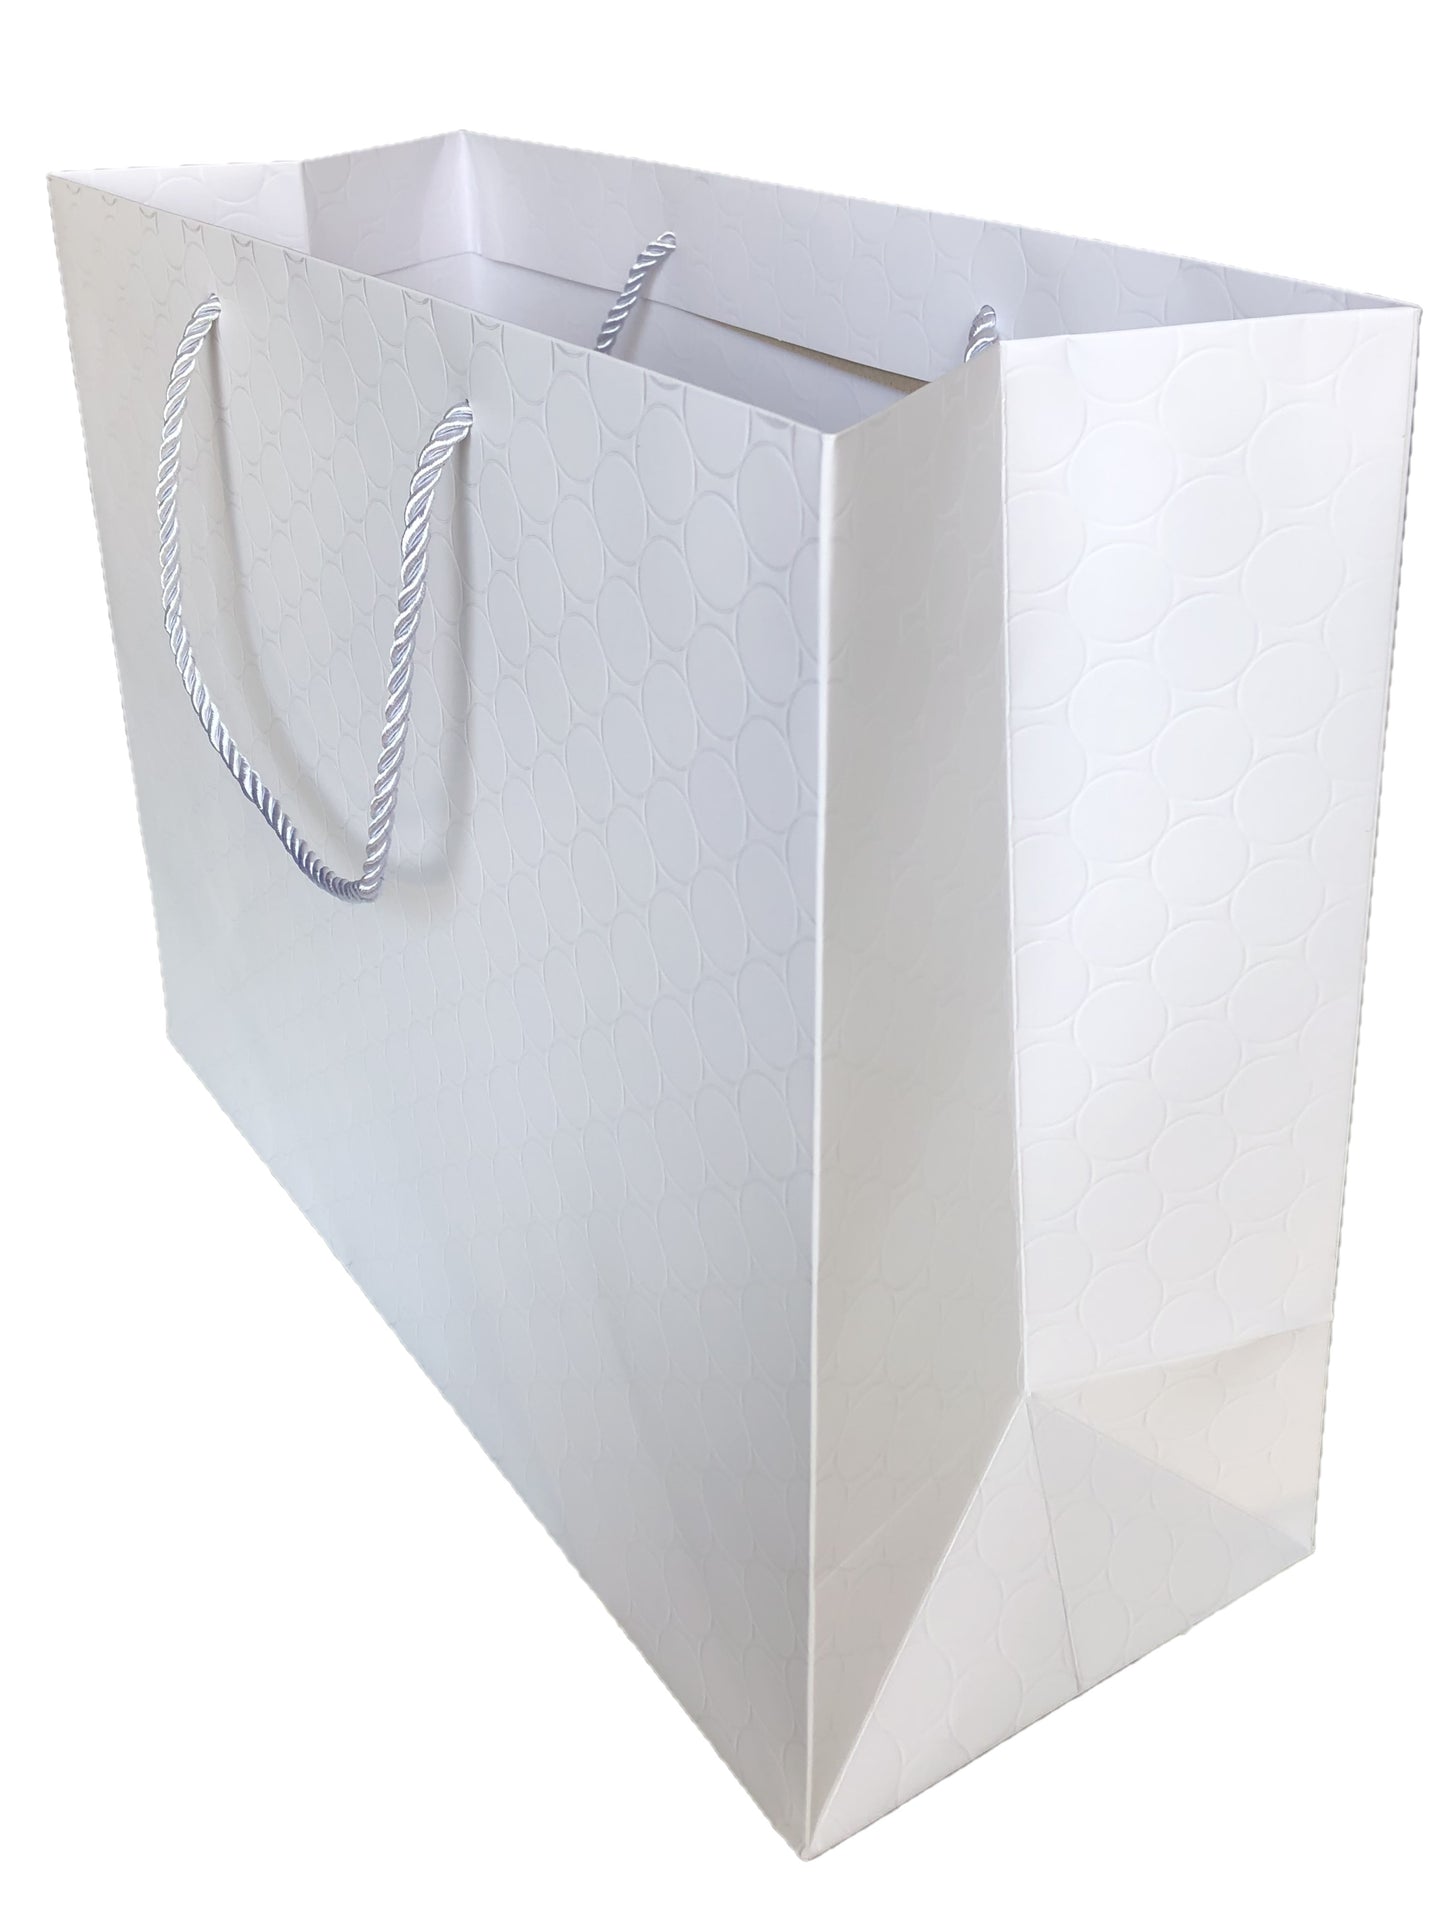 Extra Large White Paper Gift Bags Bulk with Handles 16x12x6 (100 Bags) Big Shopping Matte Luxury Fancy Elegant Embossed for Presents Merchandise Clothing Wedding Birthday Bridal Baby Shower